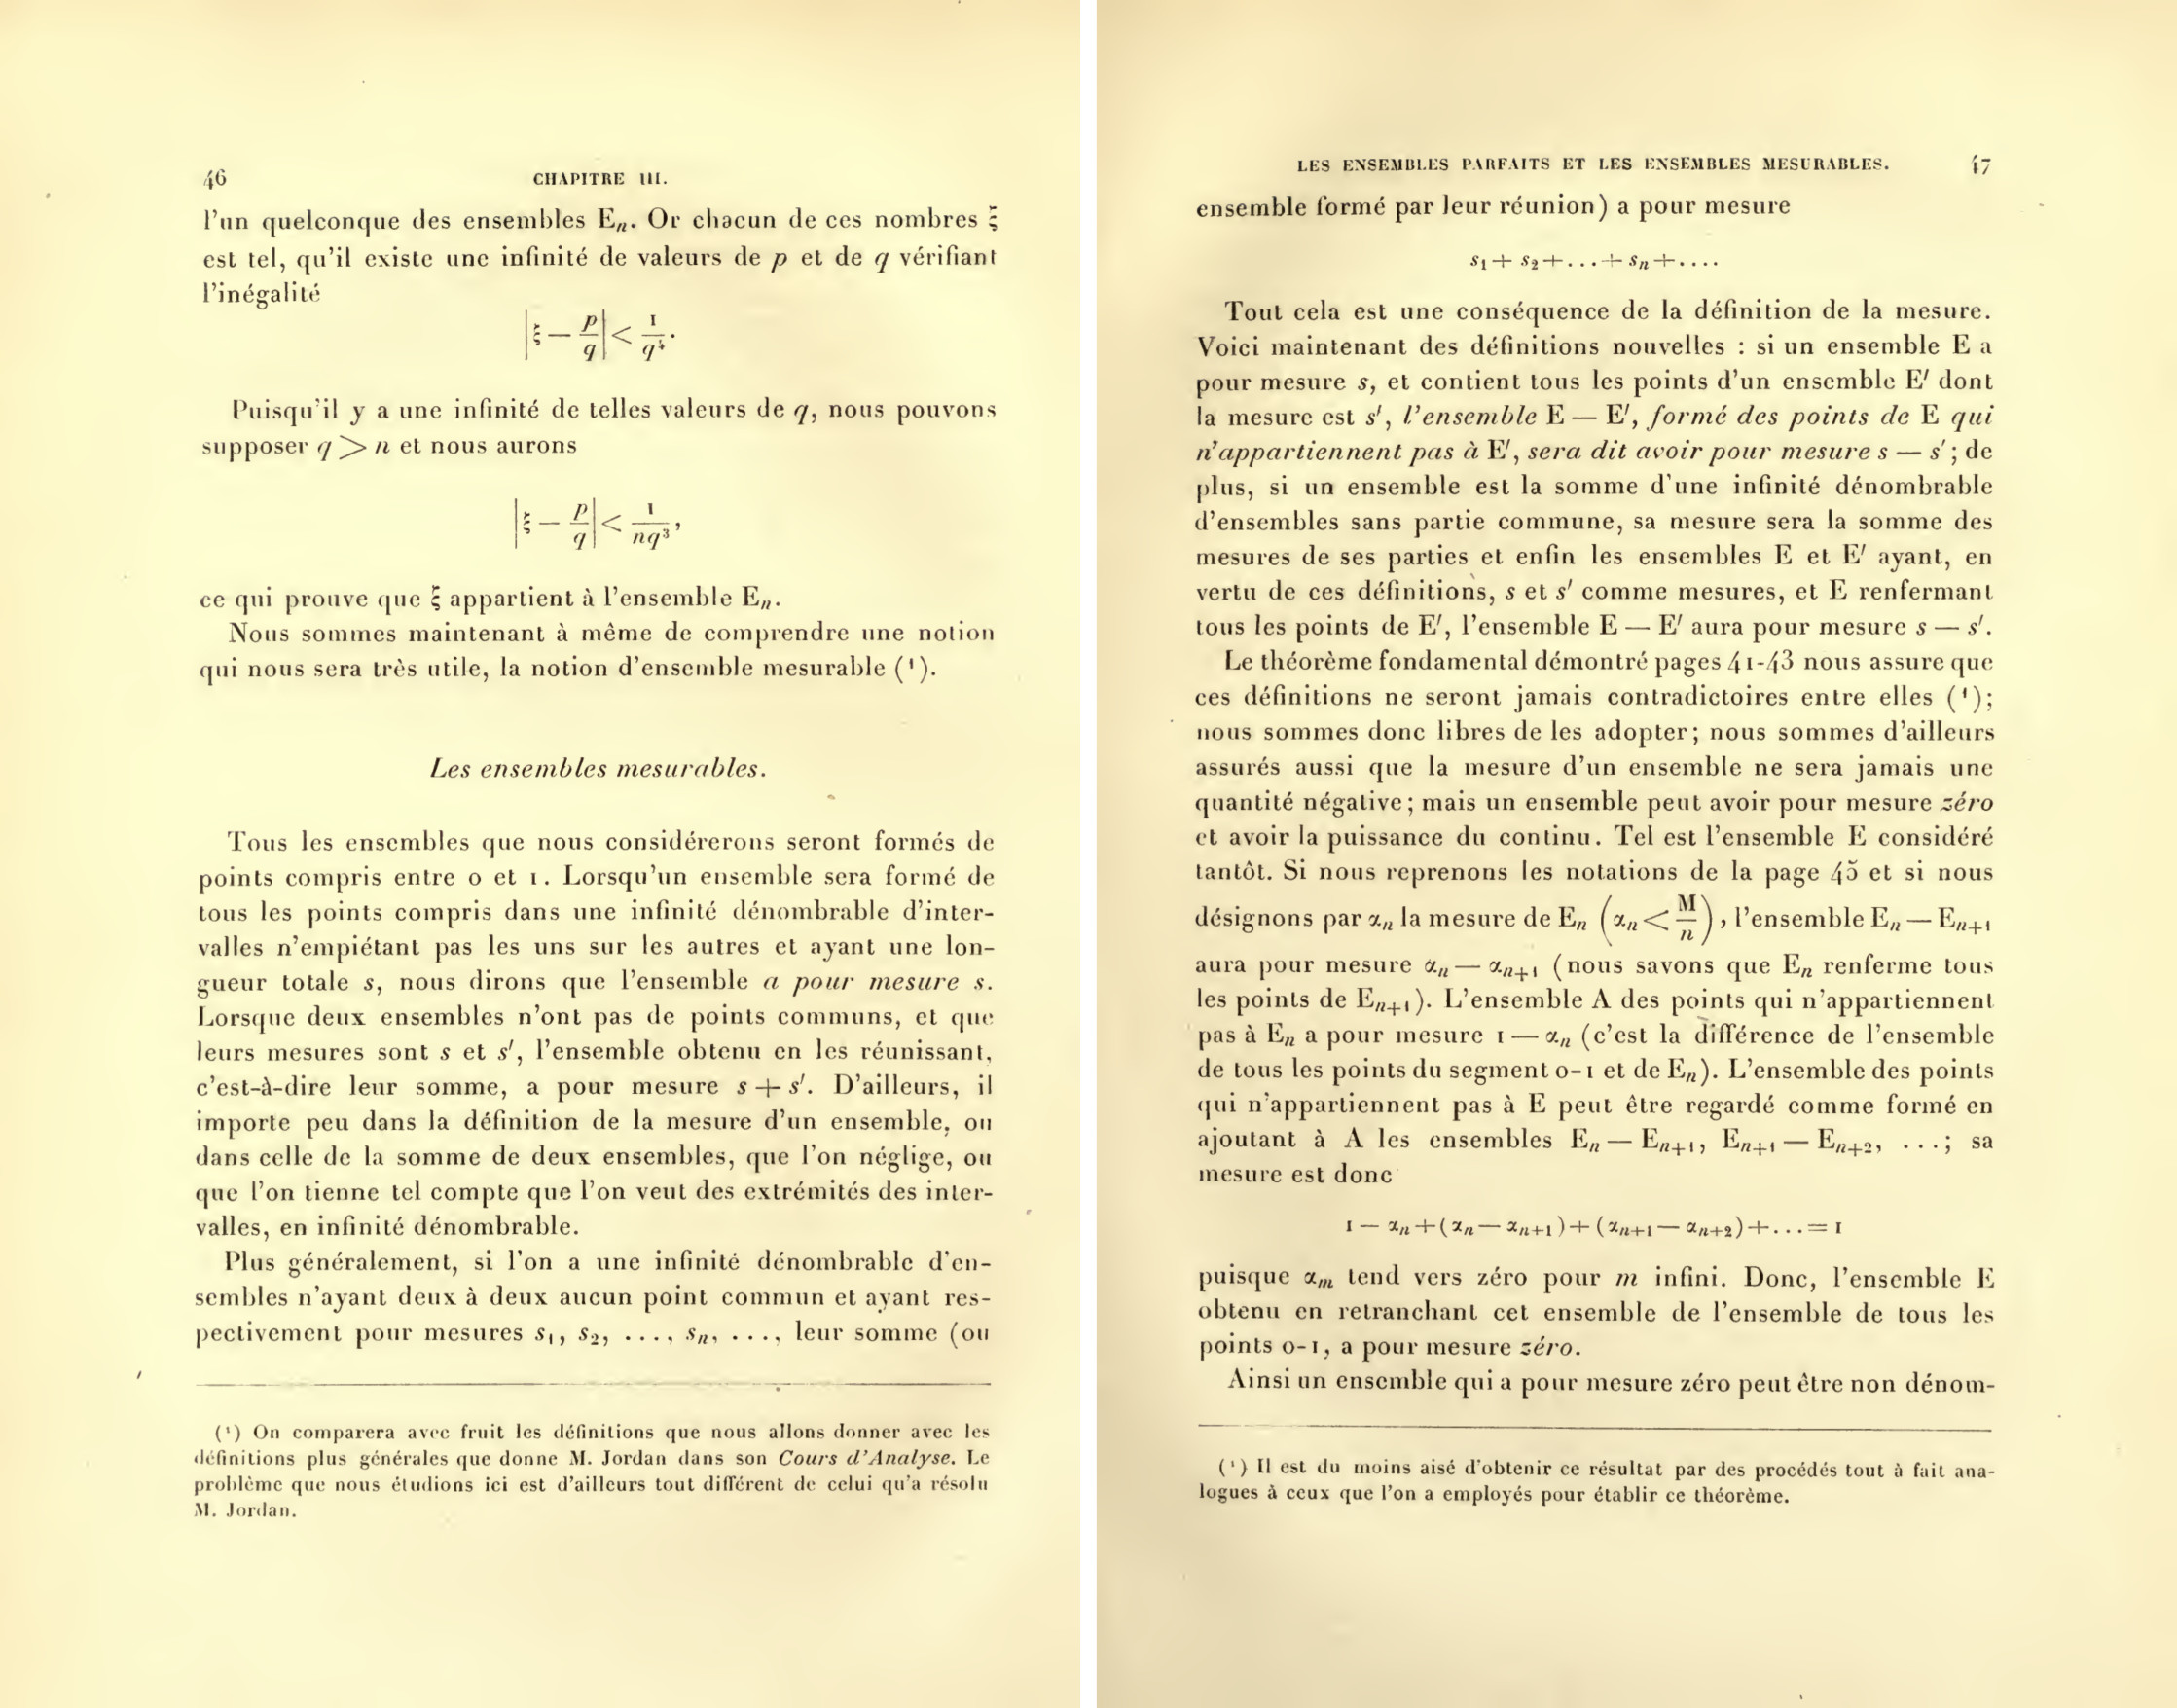 Photo of page 46 and 47 of Borel's 1898 text.